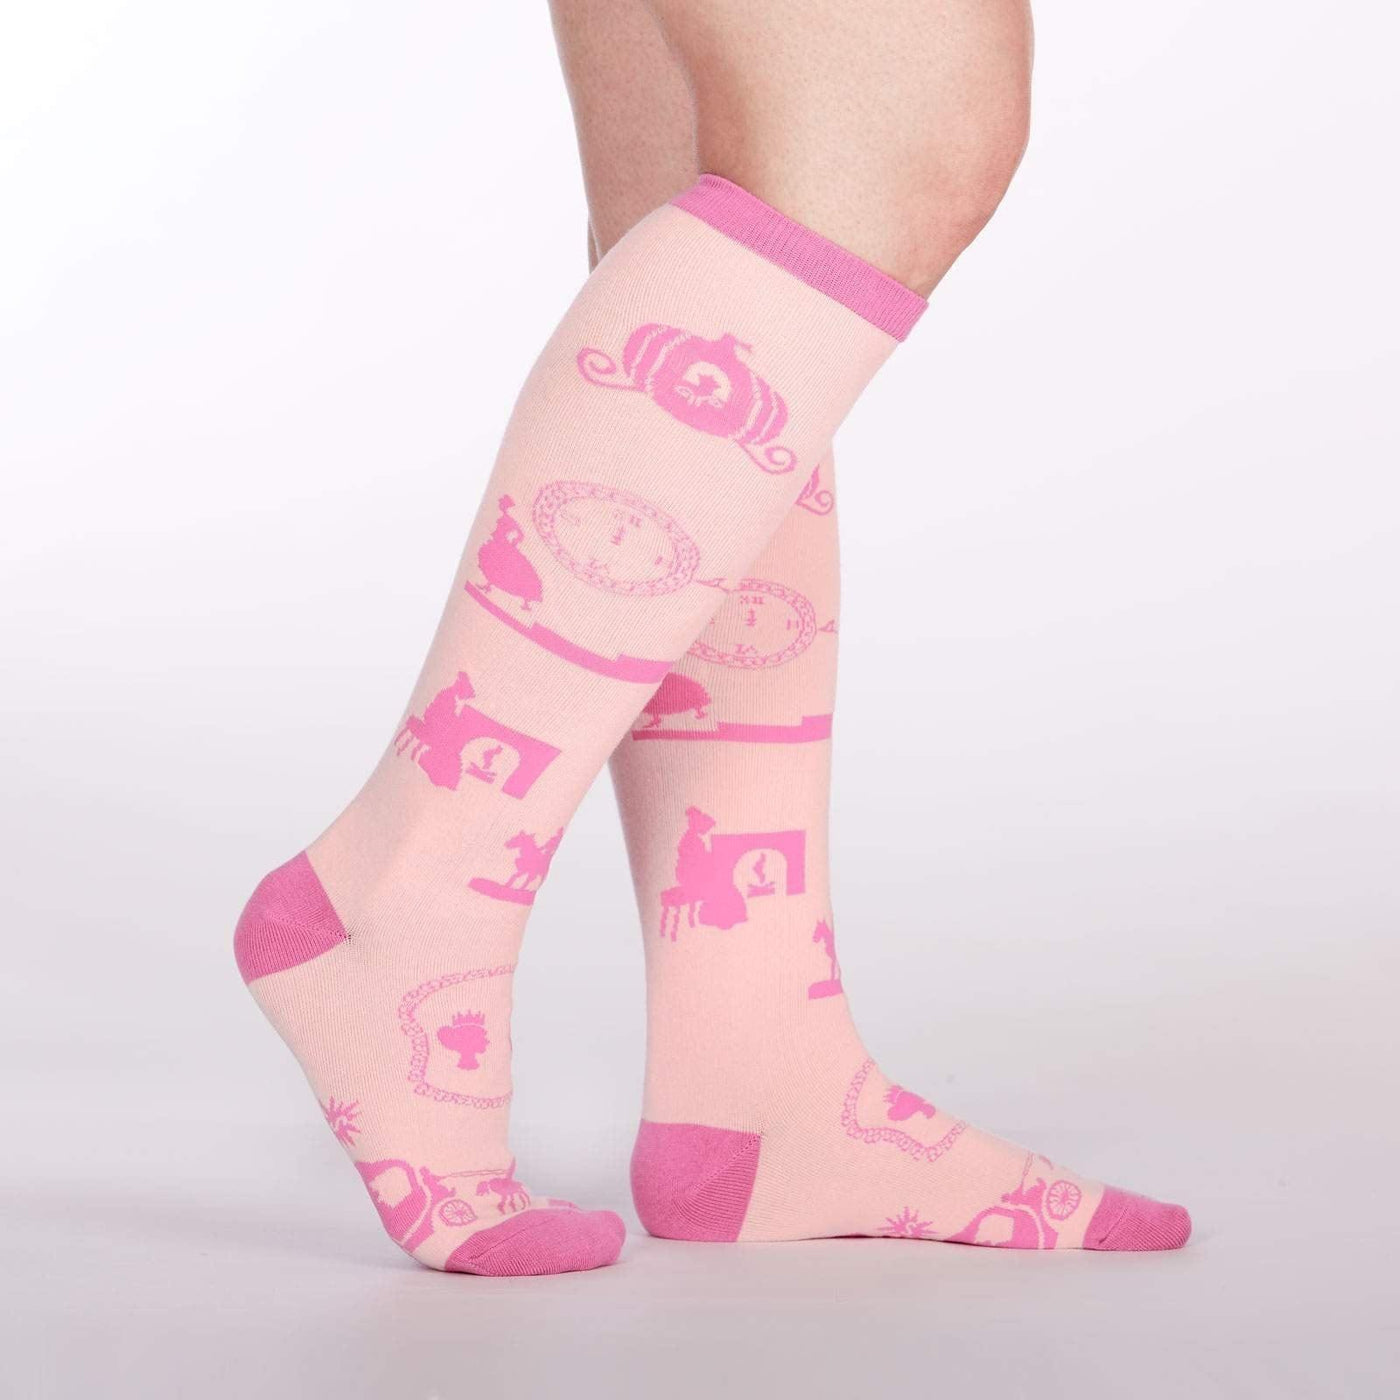 Happily Ever After, Women's Knee-high - Sock It To Me - The Sock Monster